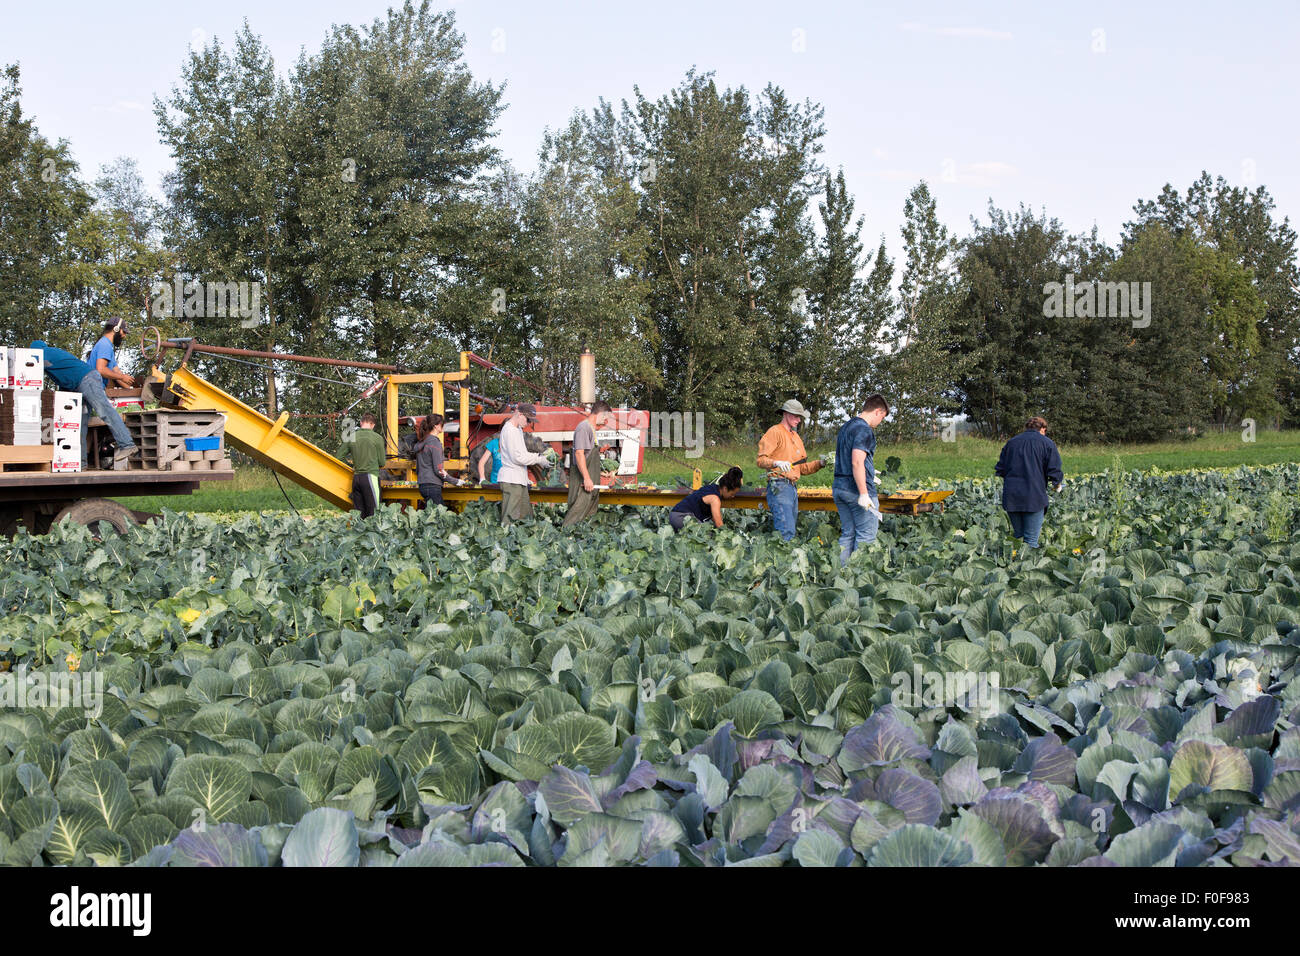 Farmer with field crew harvesting broccoli crowns,  packing & stacking boxes,  International Formall tractor pulling conveyor. Stock Photo